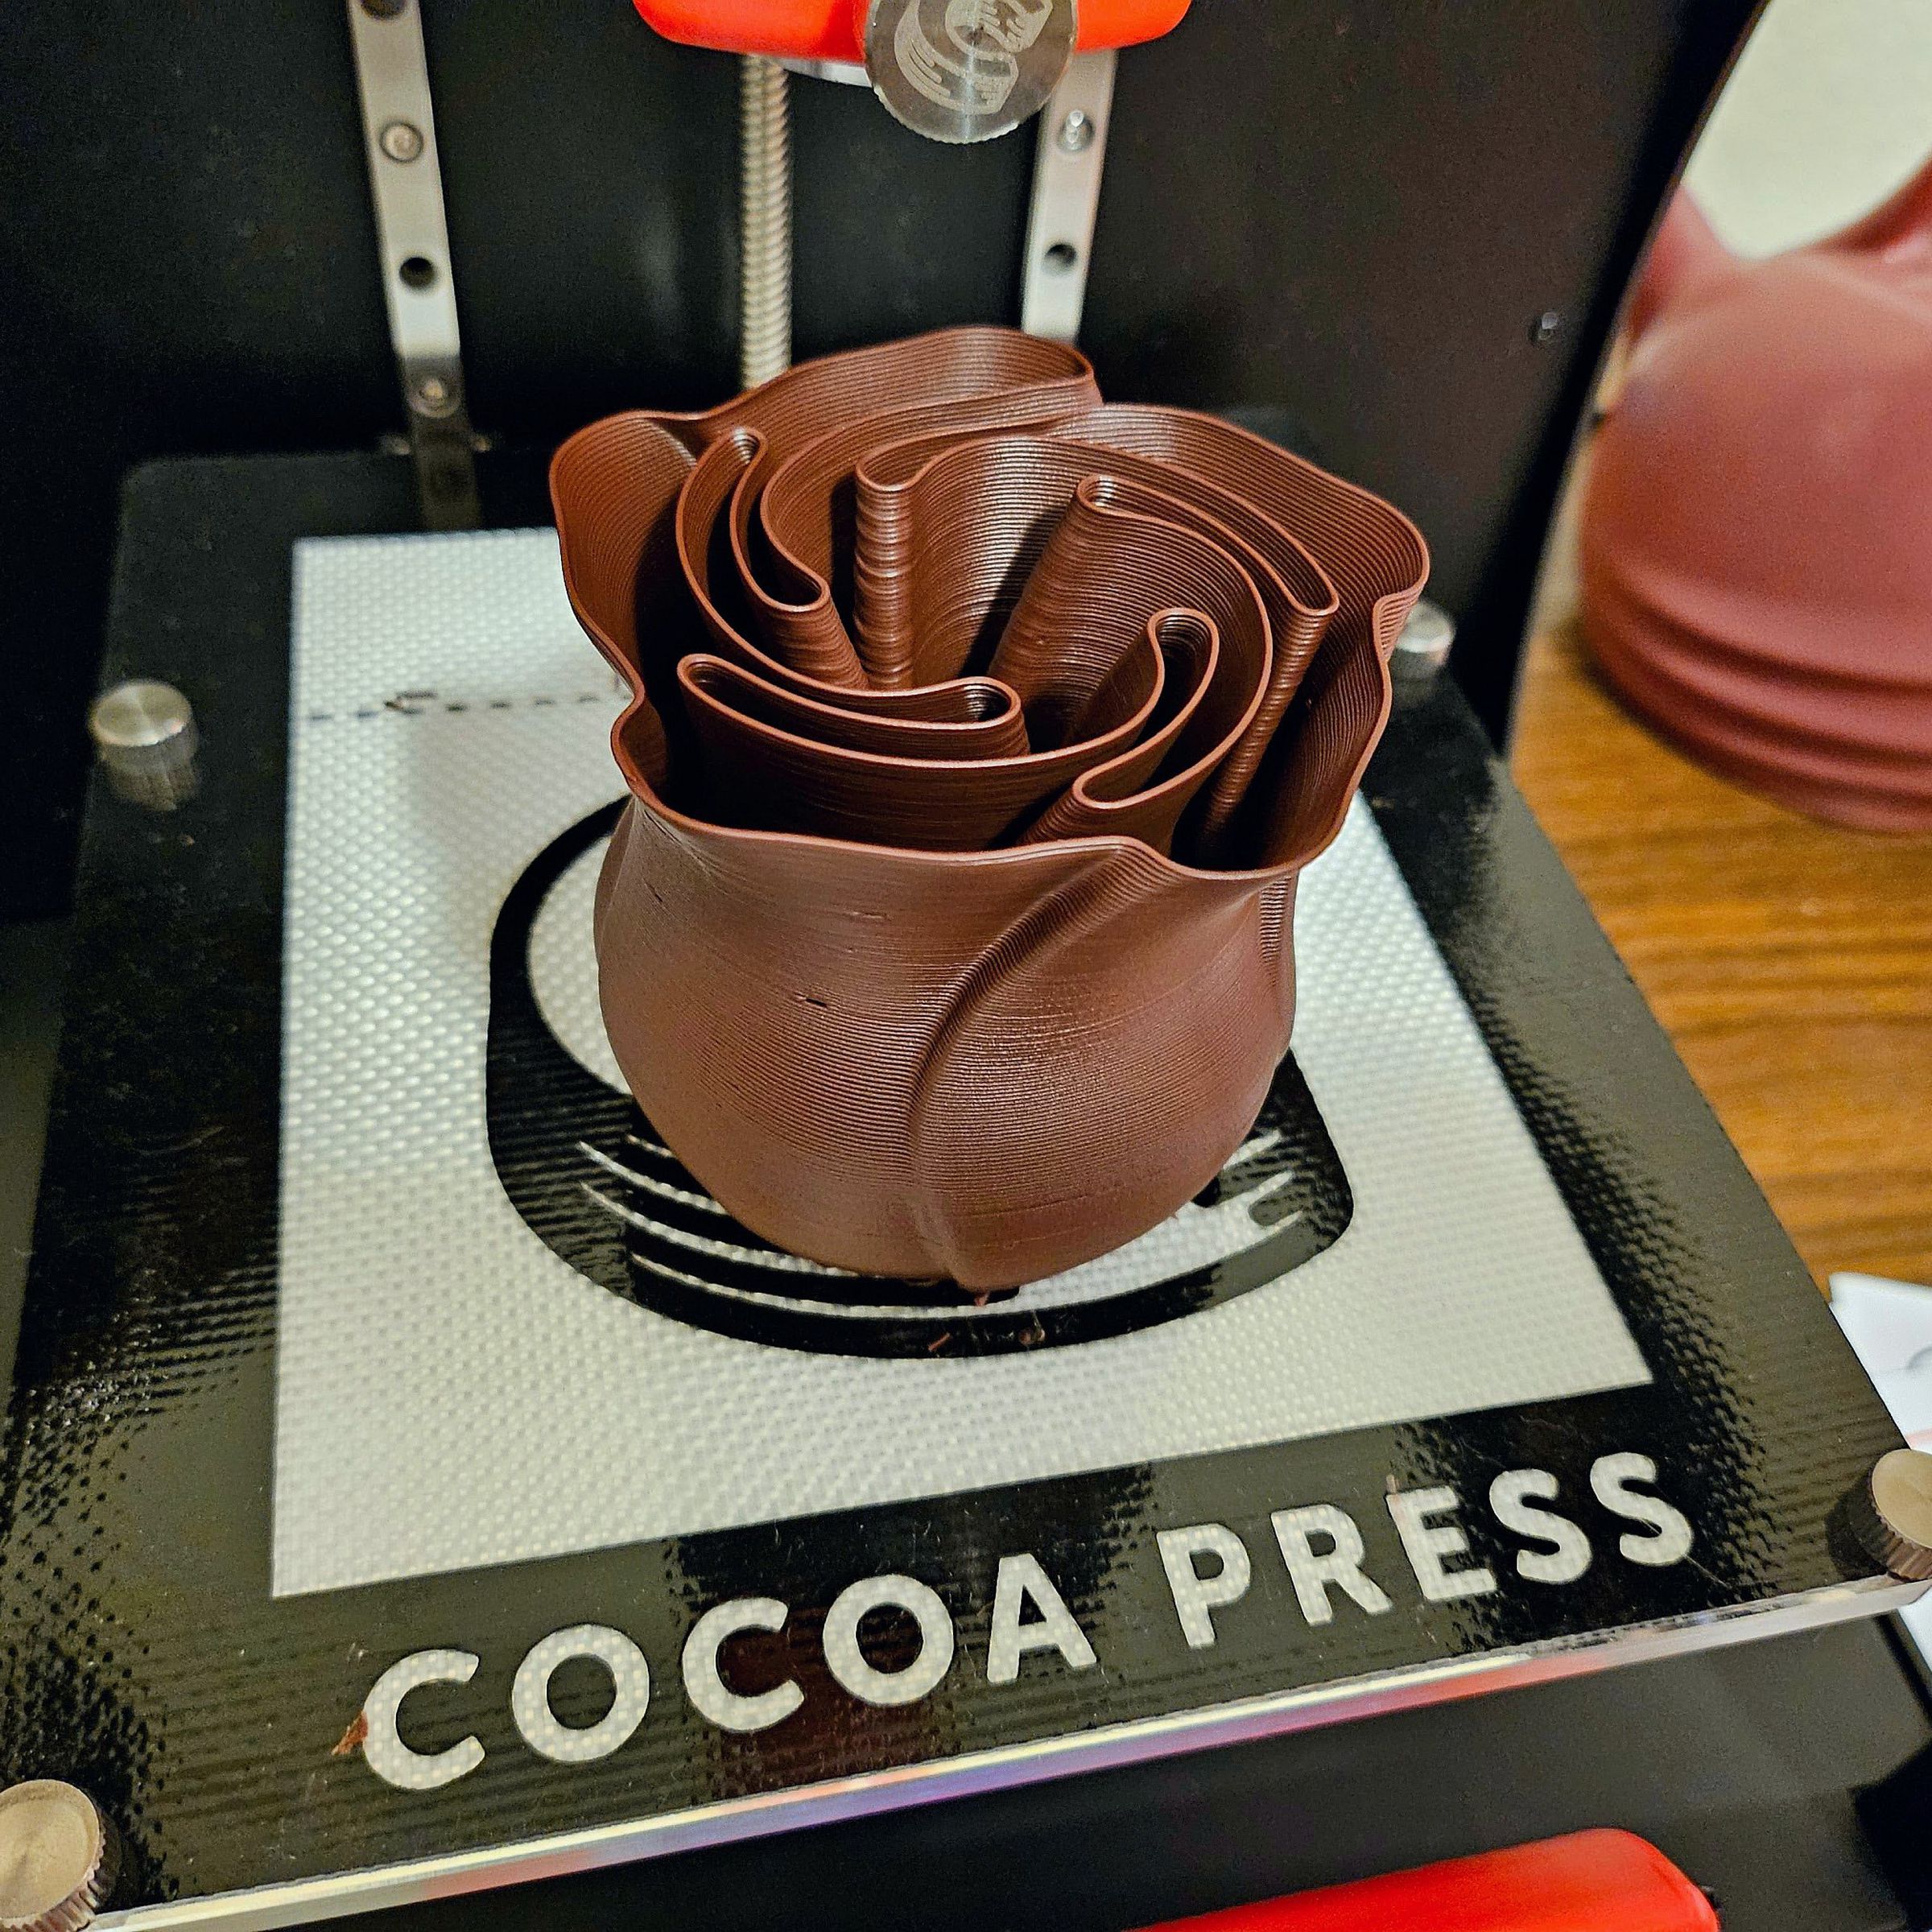 A chocolate rose printed on the Cocoa Press.